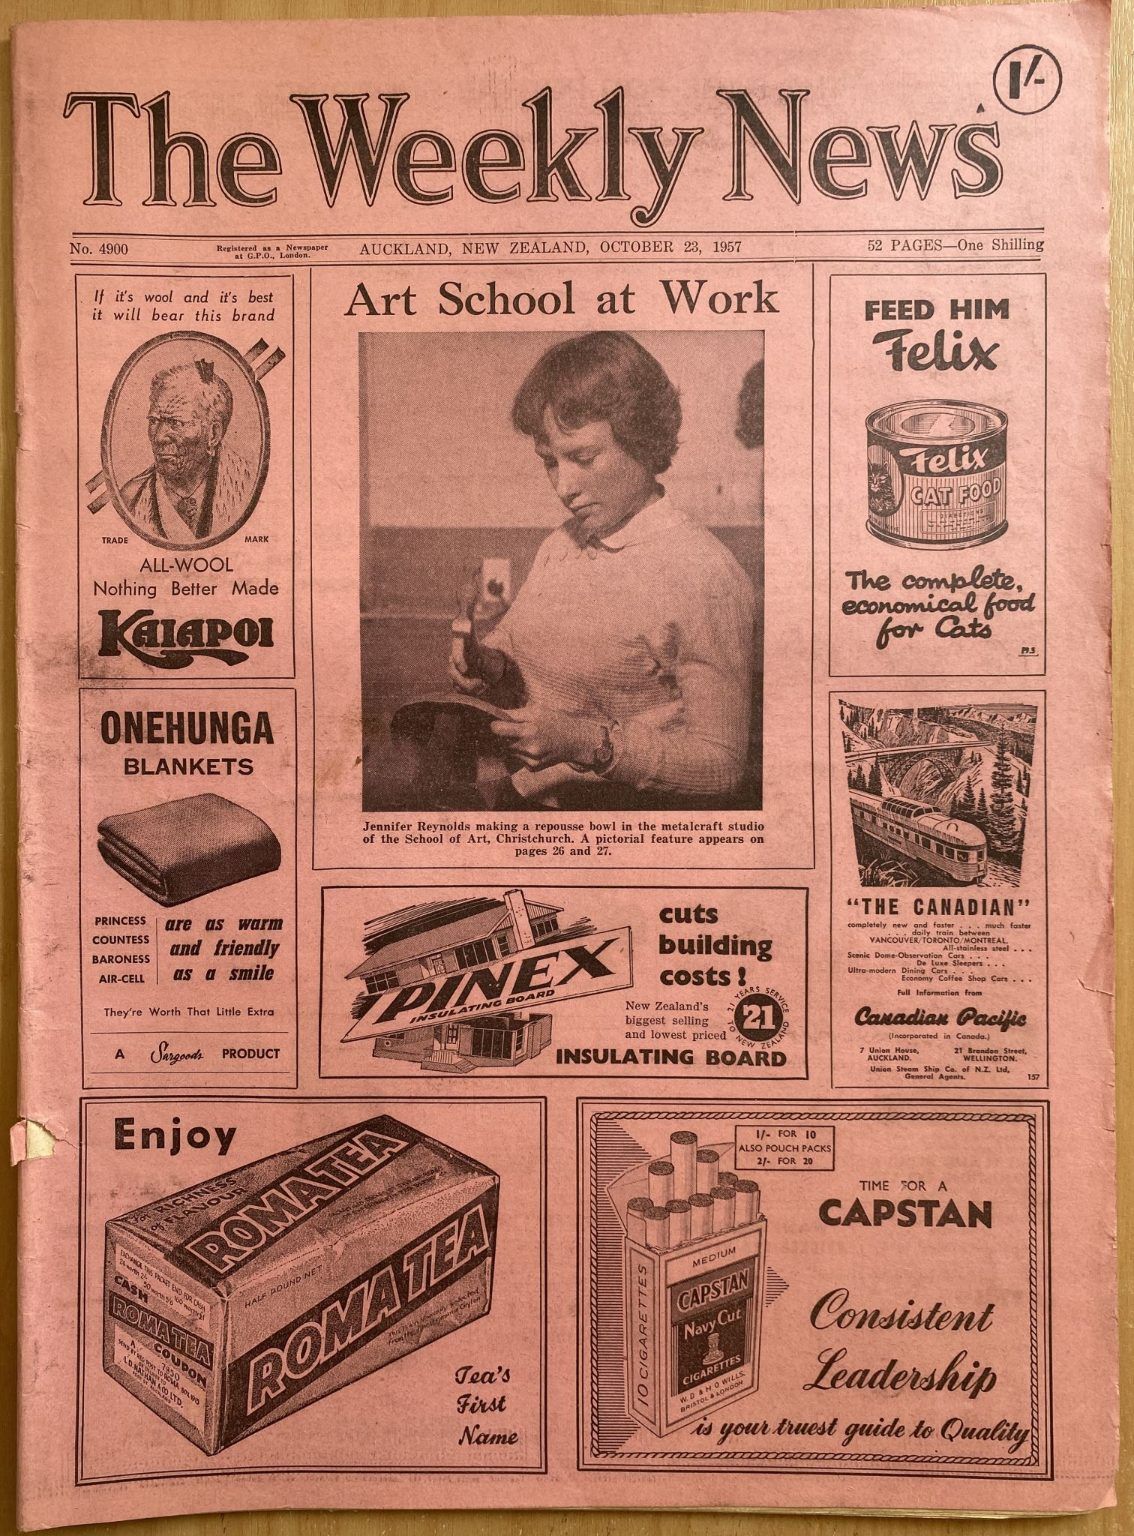 OLD NEWSPAPER: The Weekly News, No. 4900, 23 October 1957